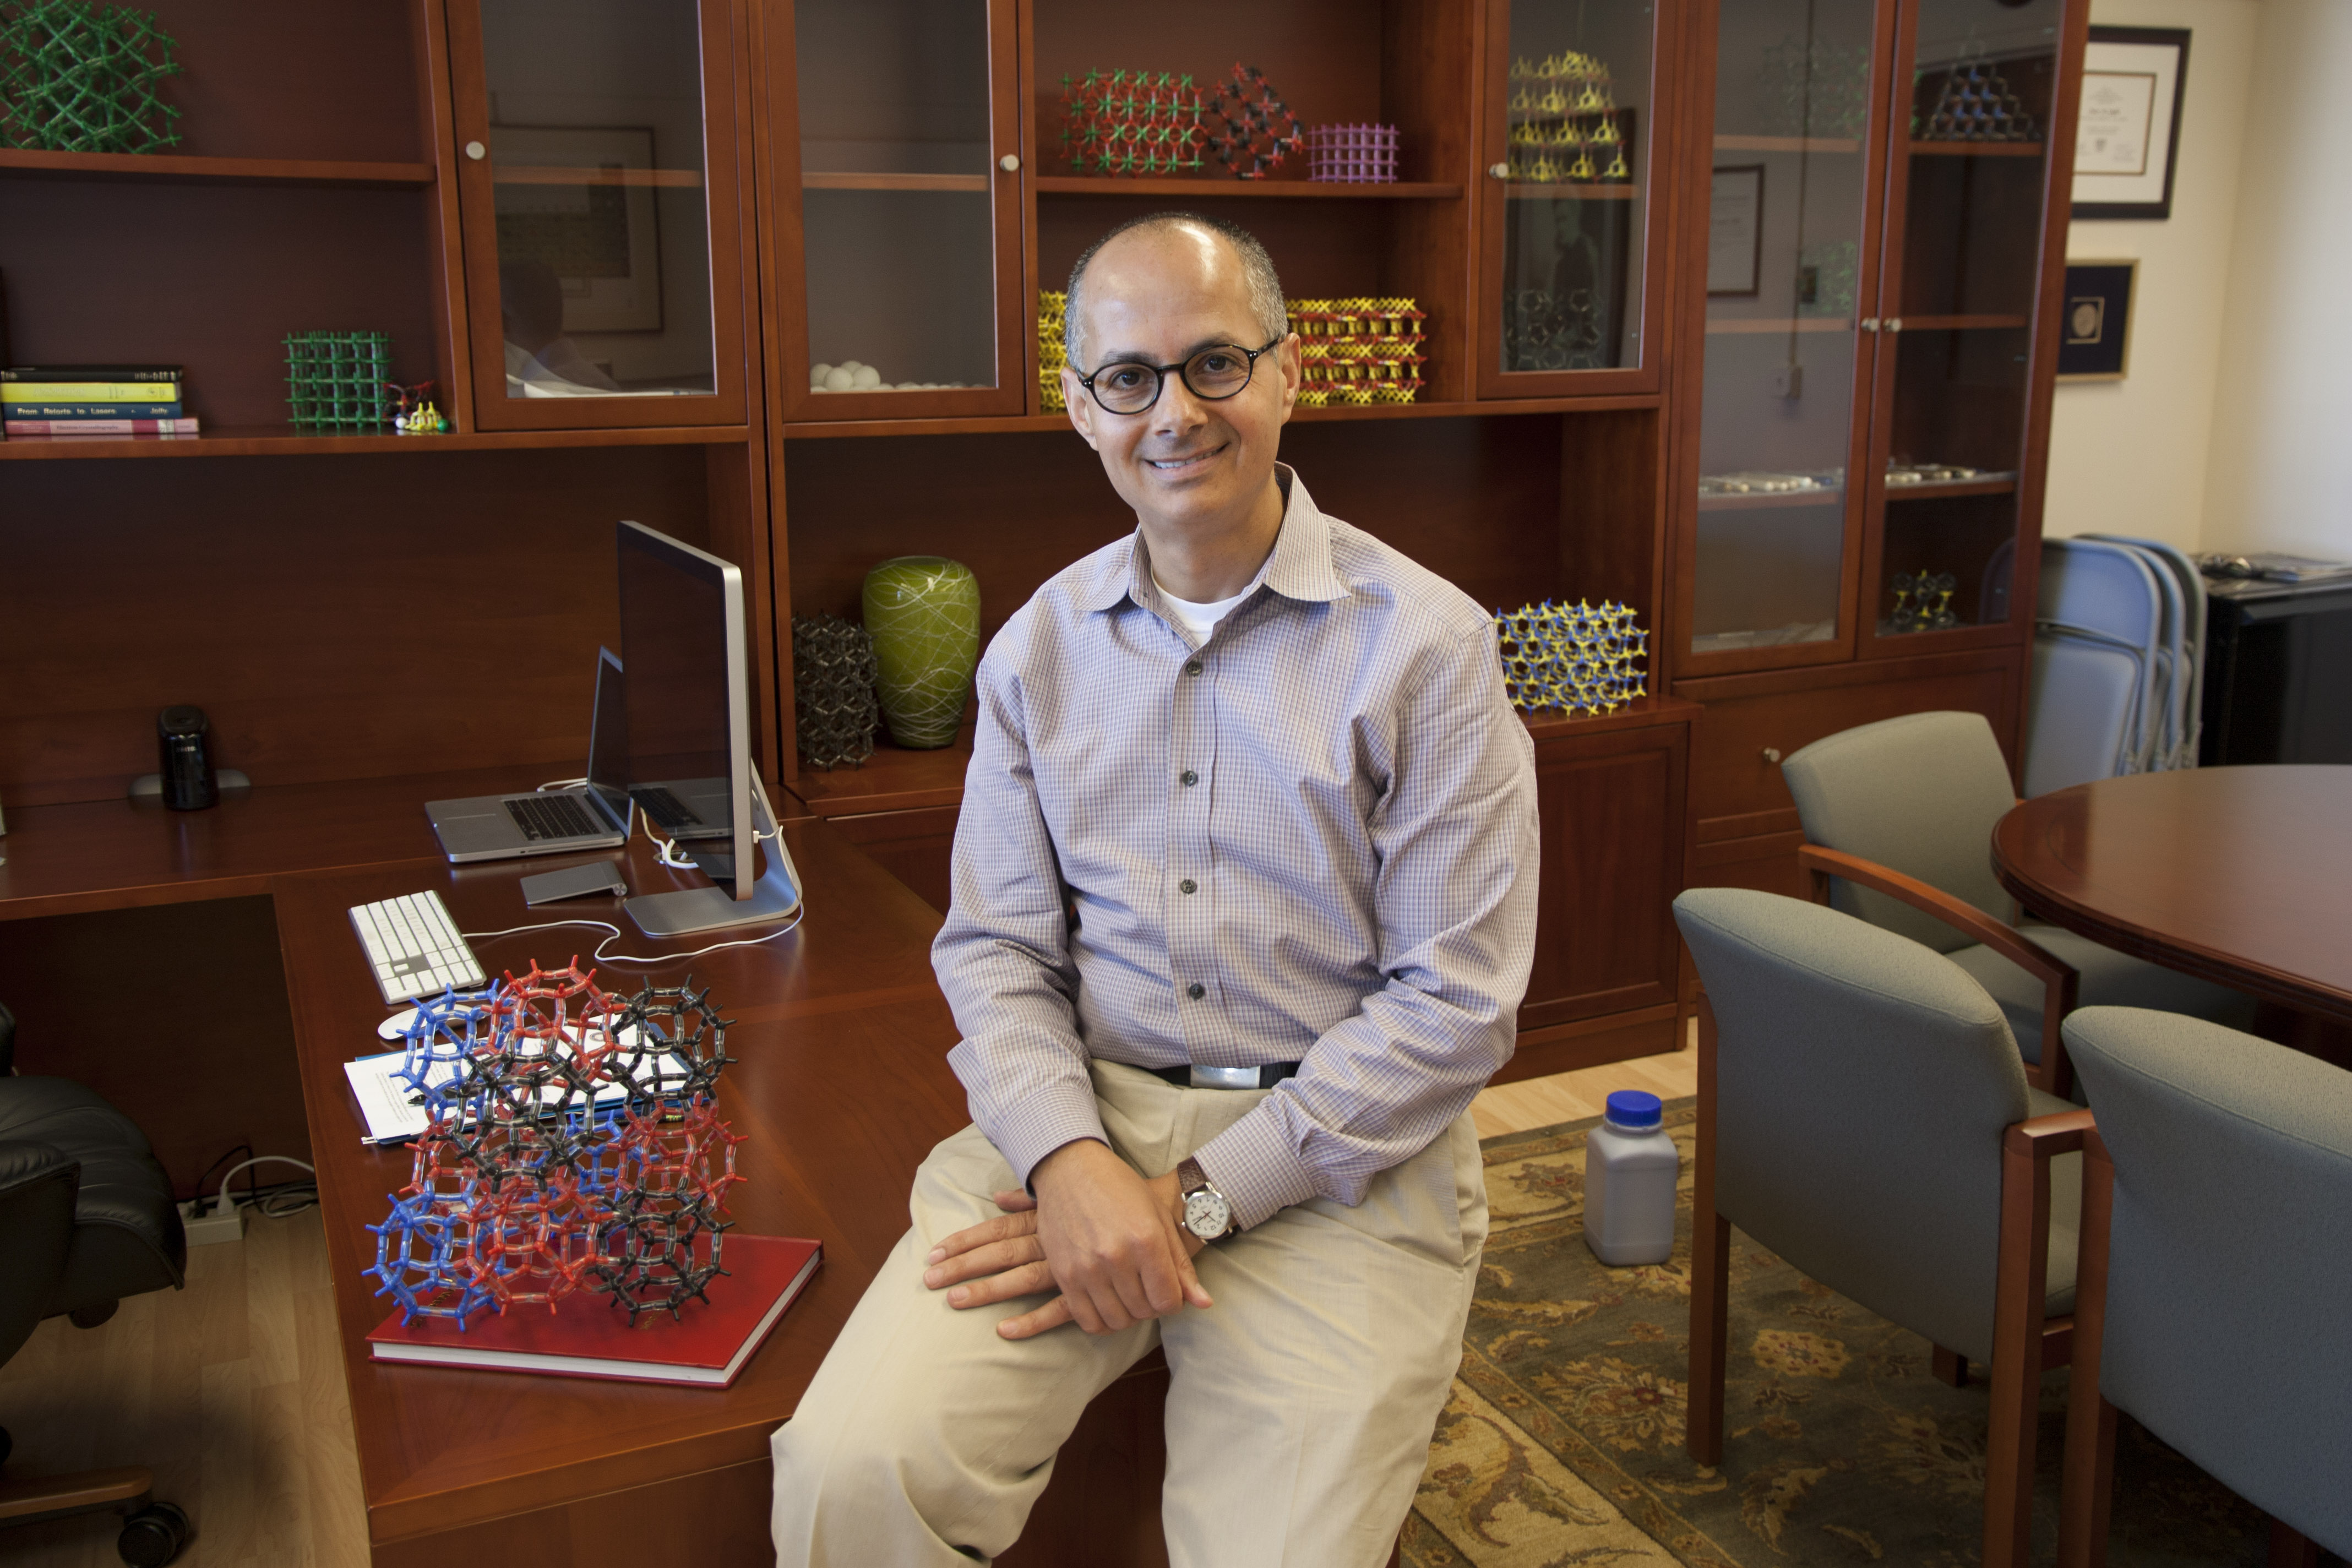 Color photo of a smiling man wearing glasses, sitting on the edge of a desk, surrounded by models of molecules positioned throughout the office.